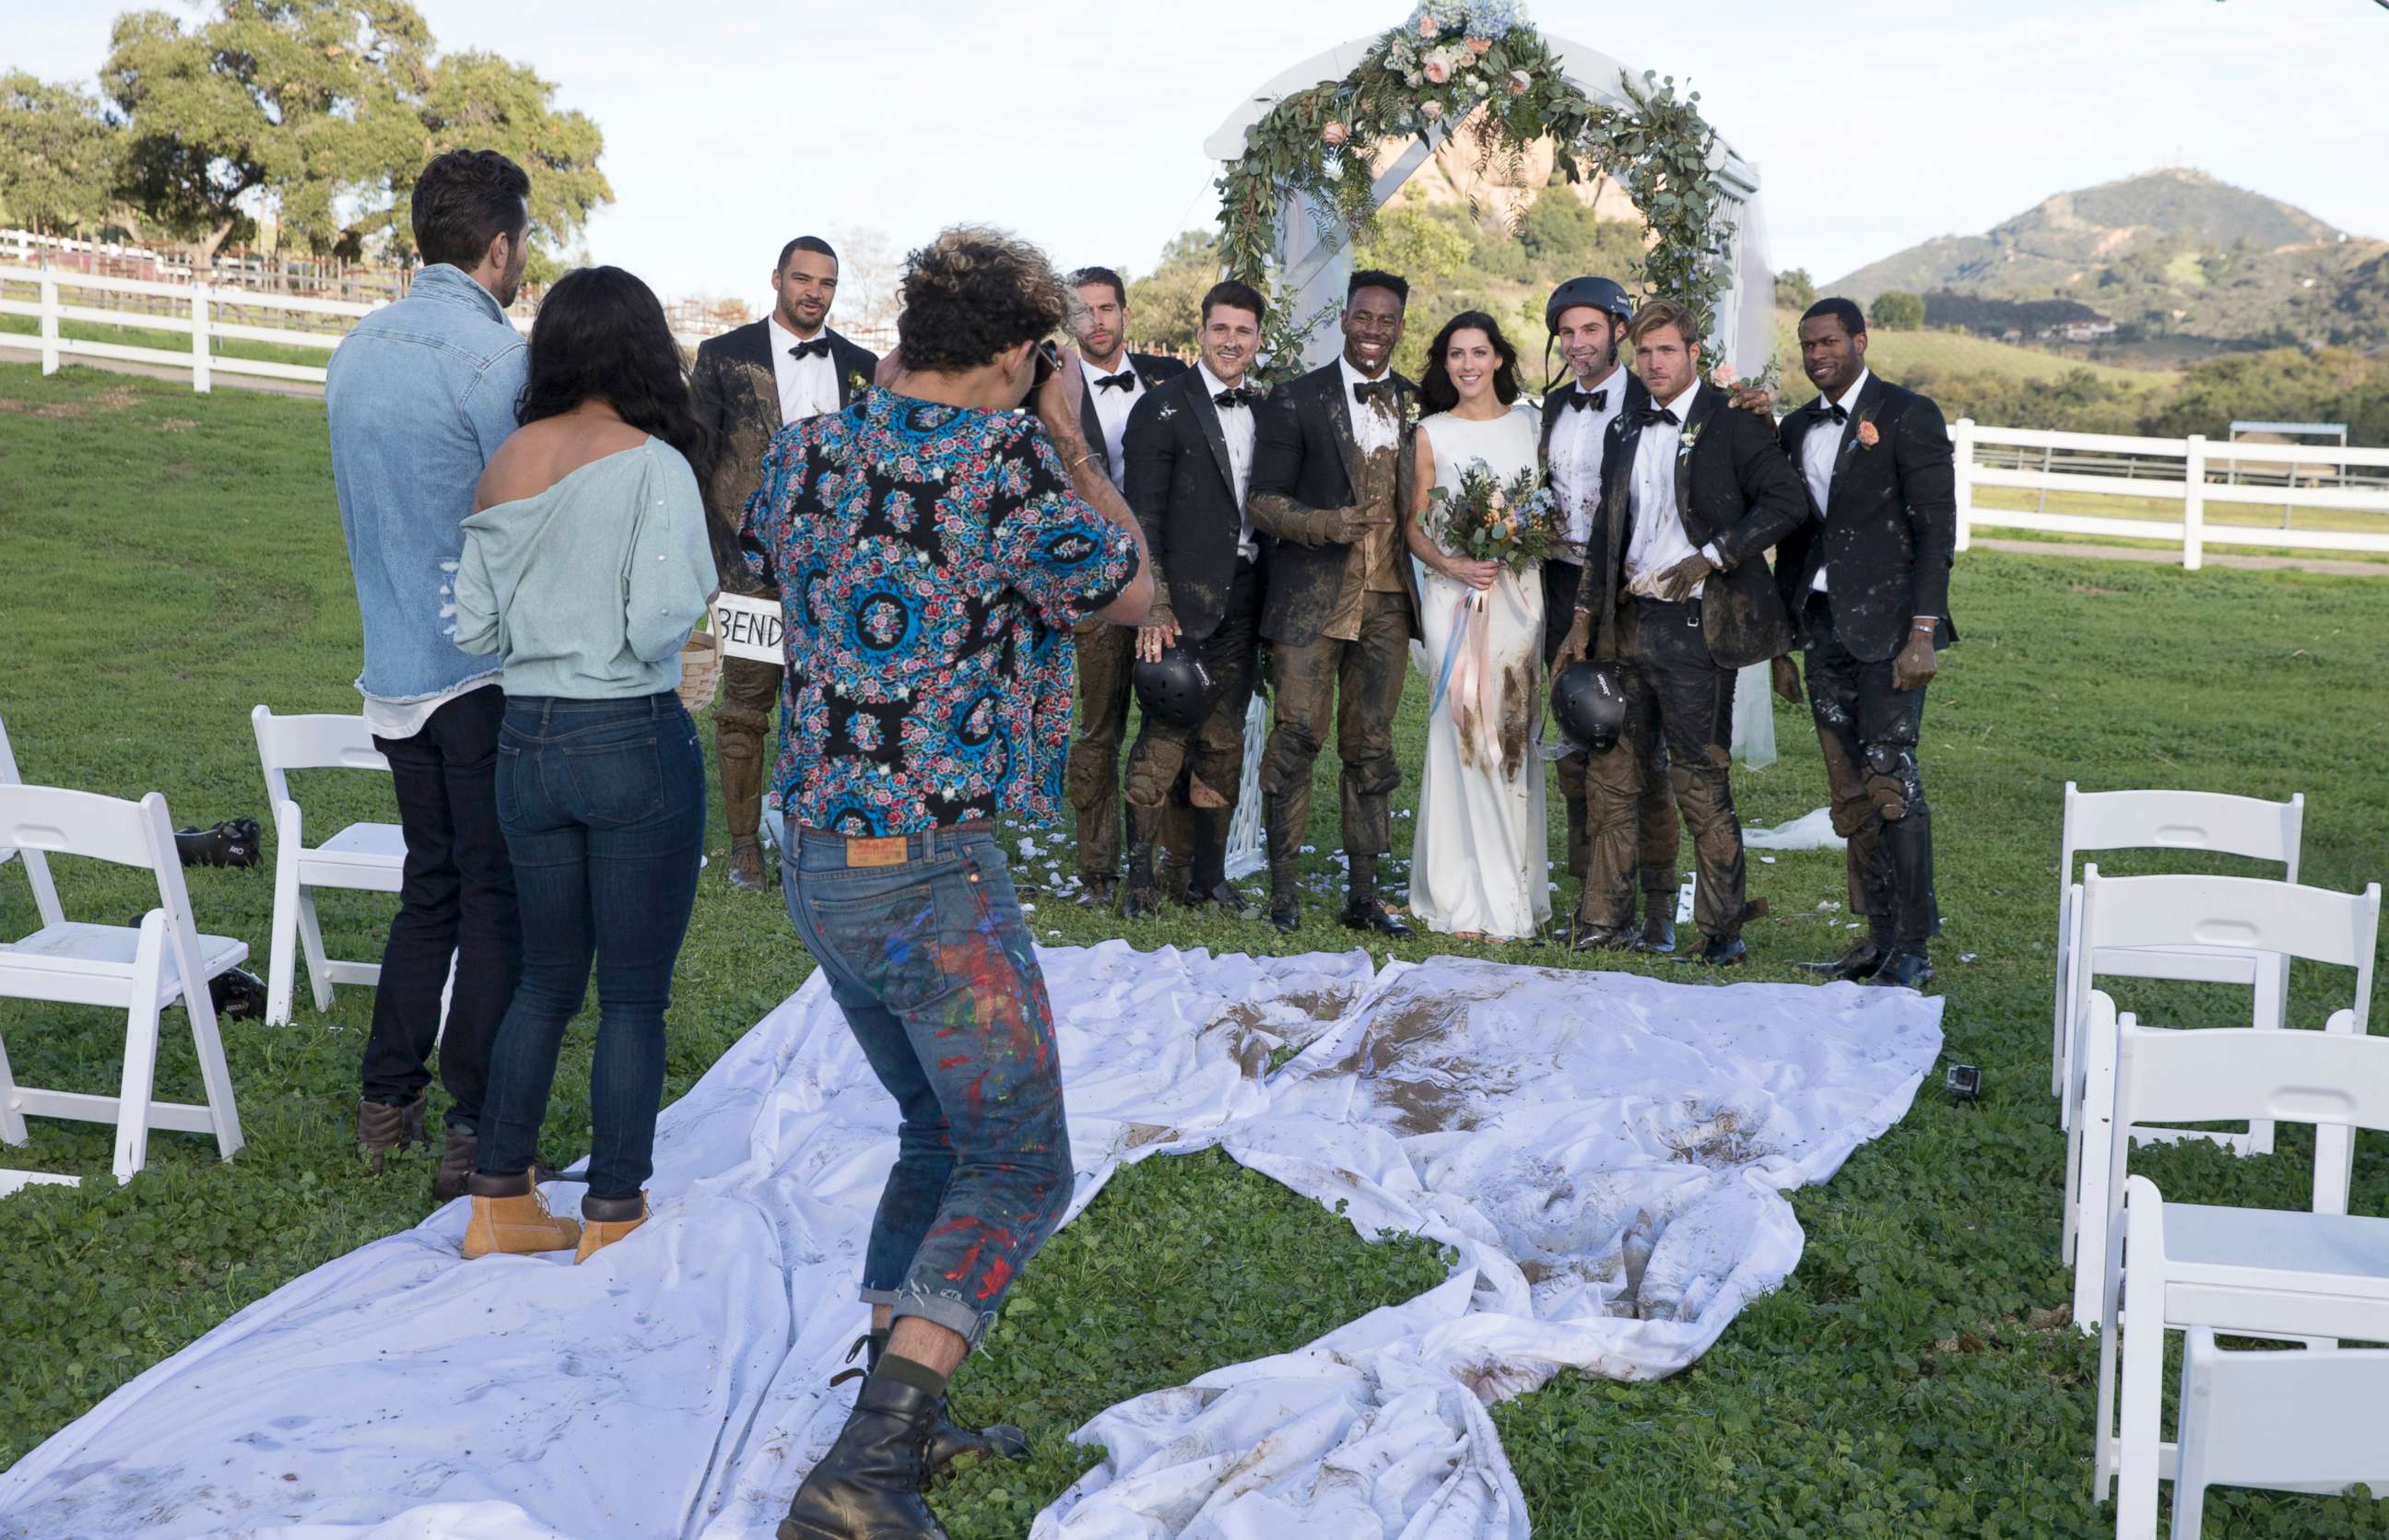 PHOTO: Bachelorette Becca Kufrin, with some of the contestants, tries to find a soul mate, on "The Bachelorette," June 4, 2018, on The ABC Television Network.